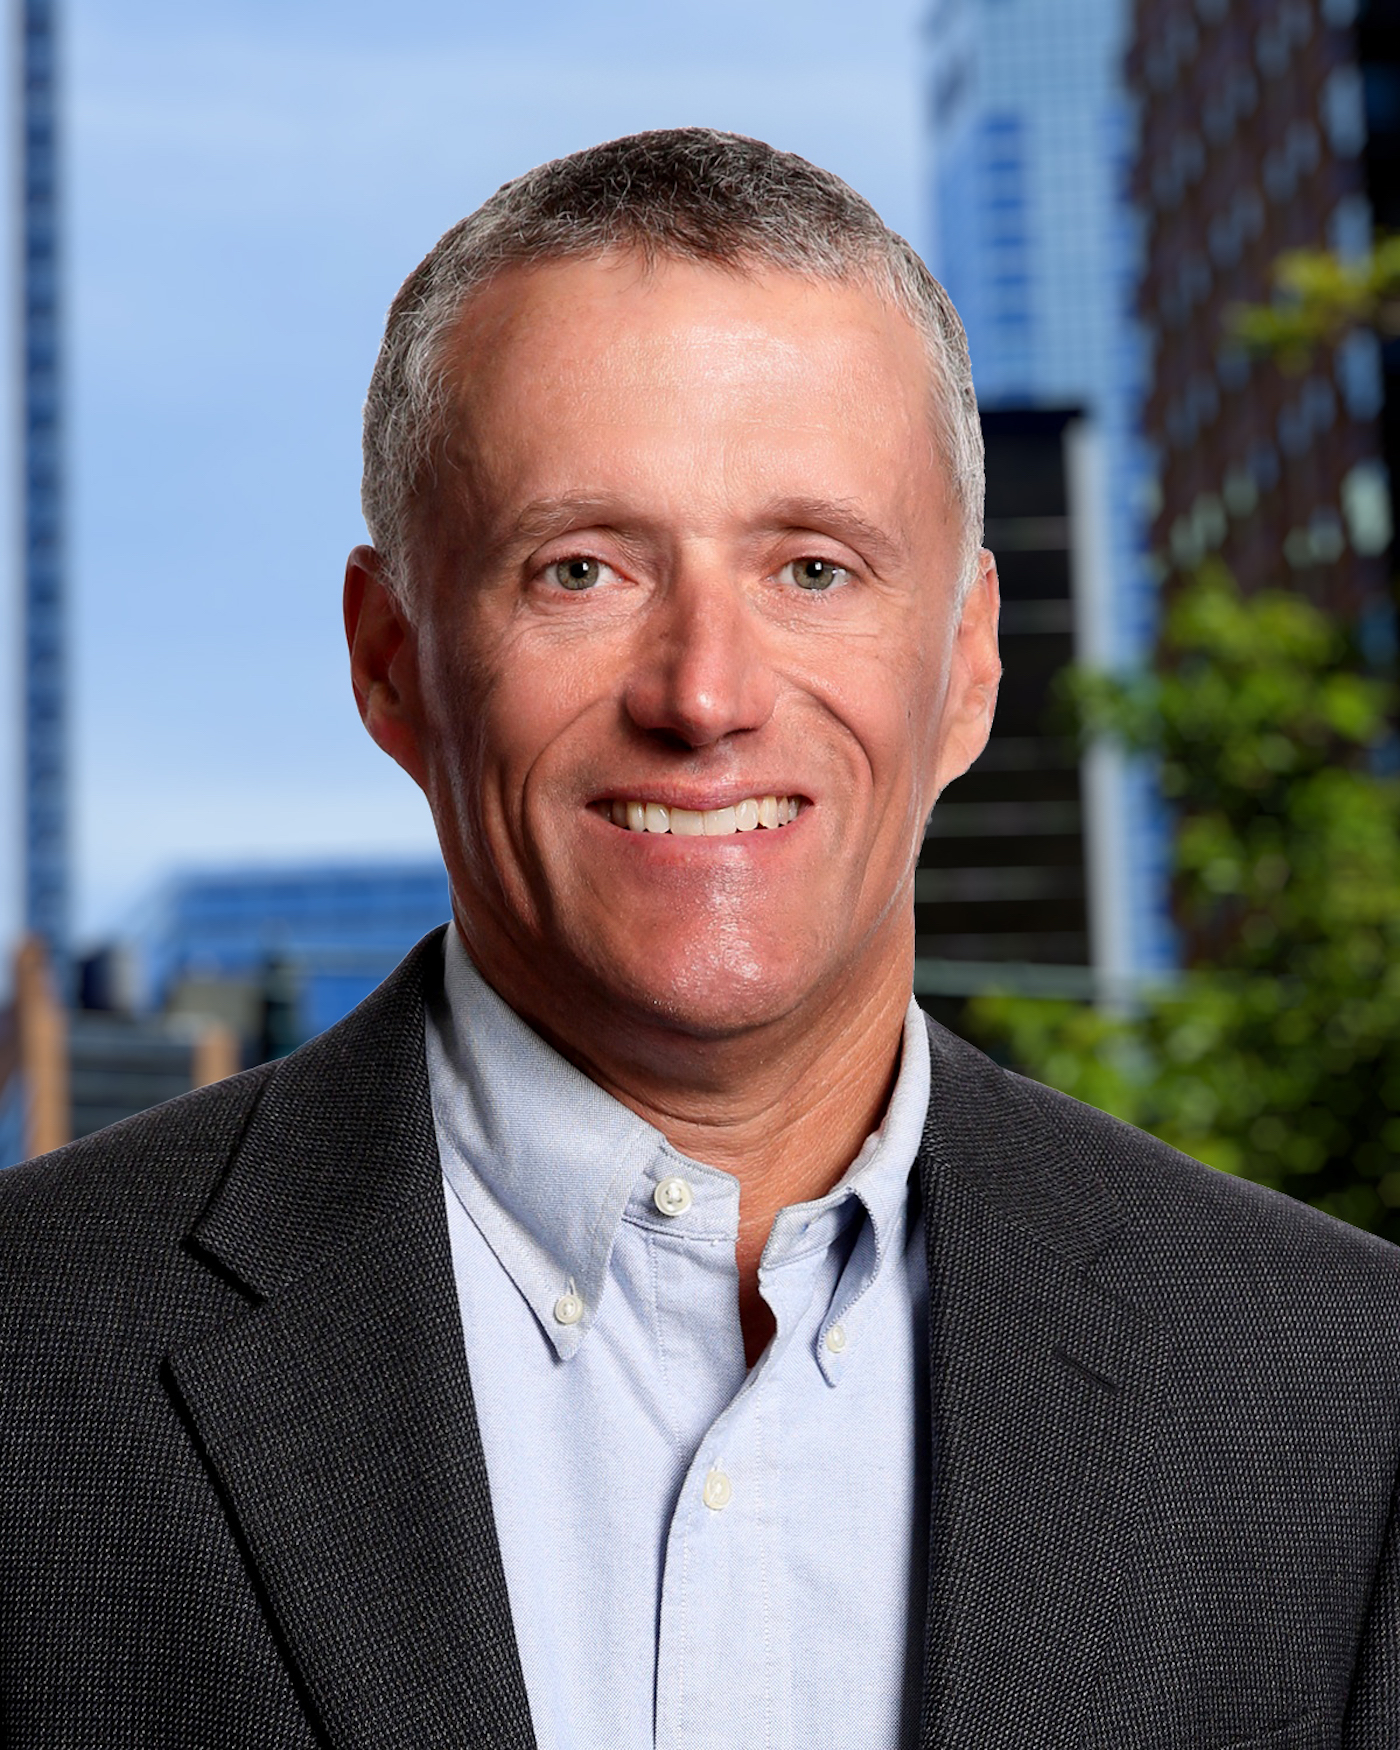 Courtesy. PGT recently hired John Kunz as the new senior VP and CFO.